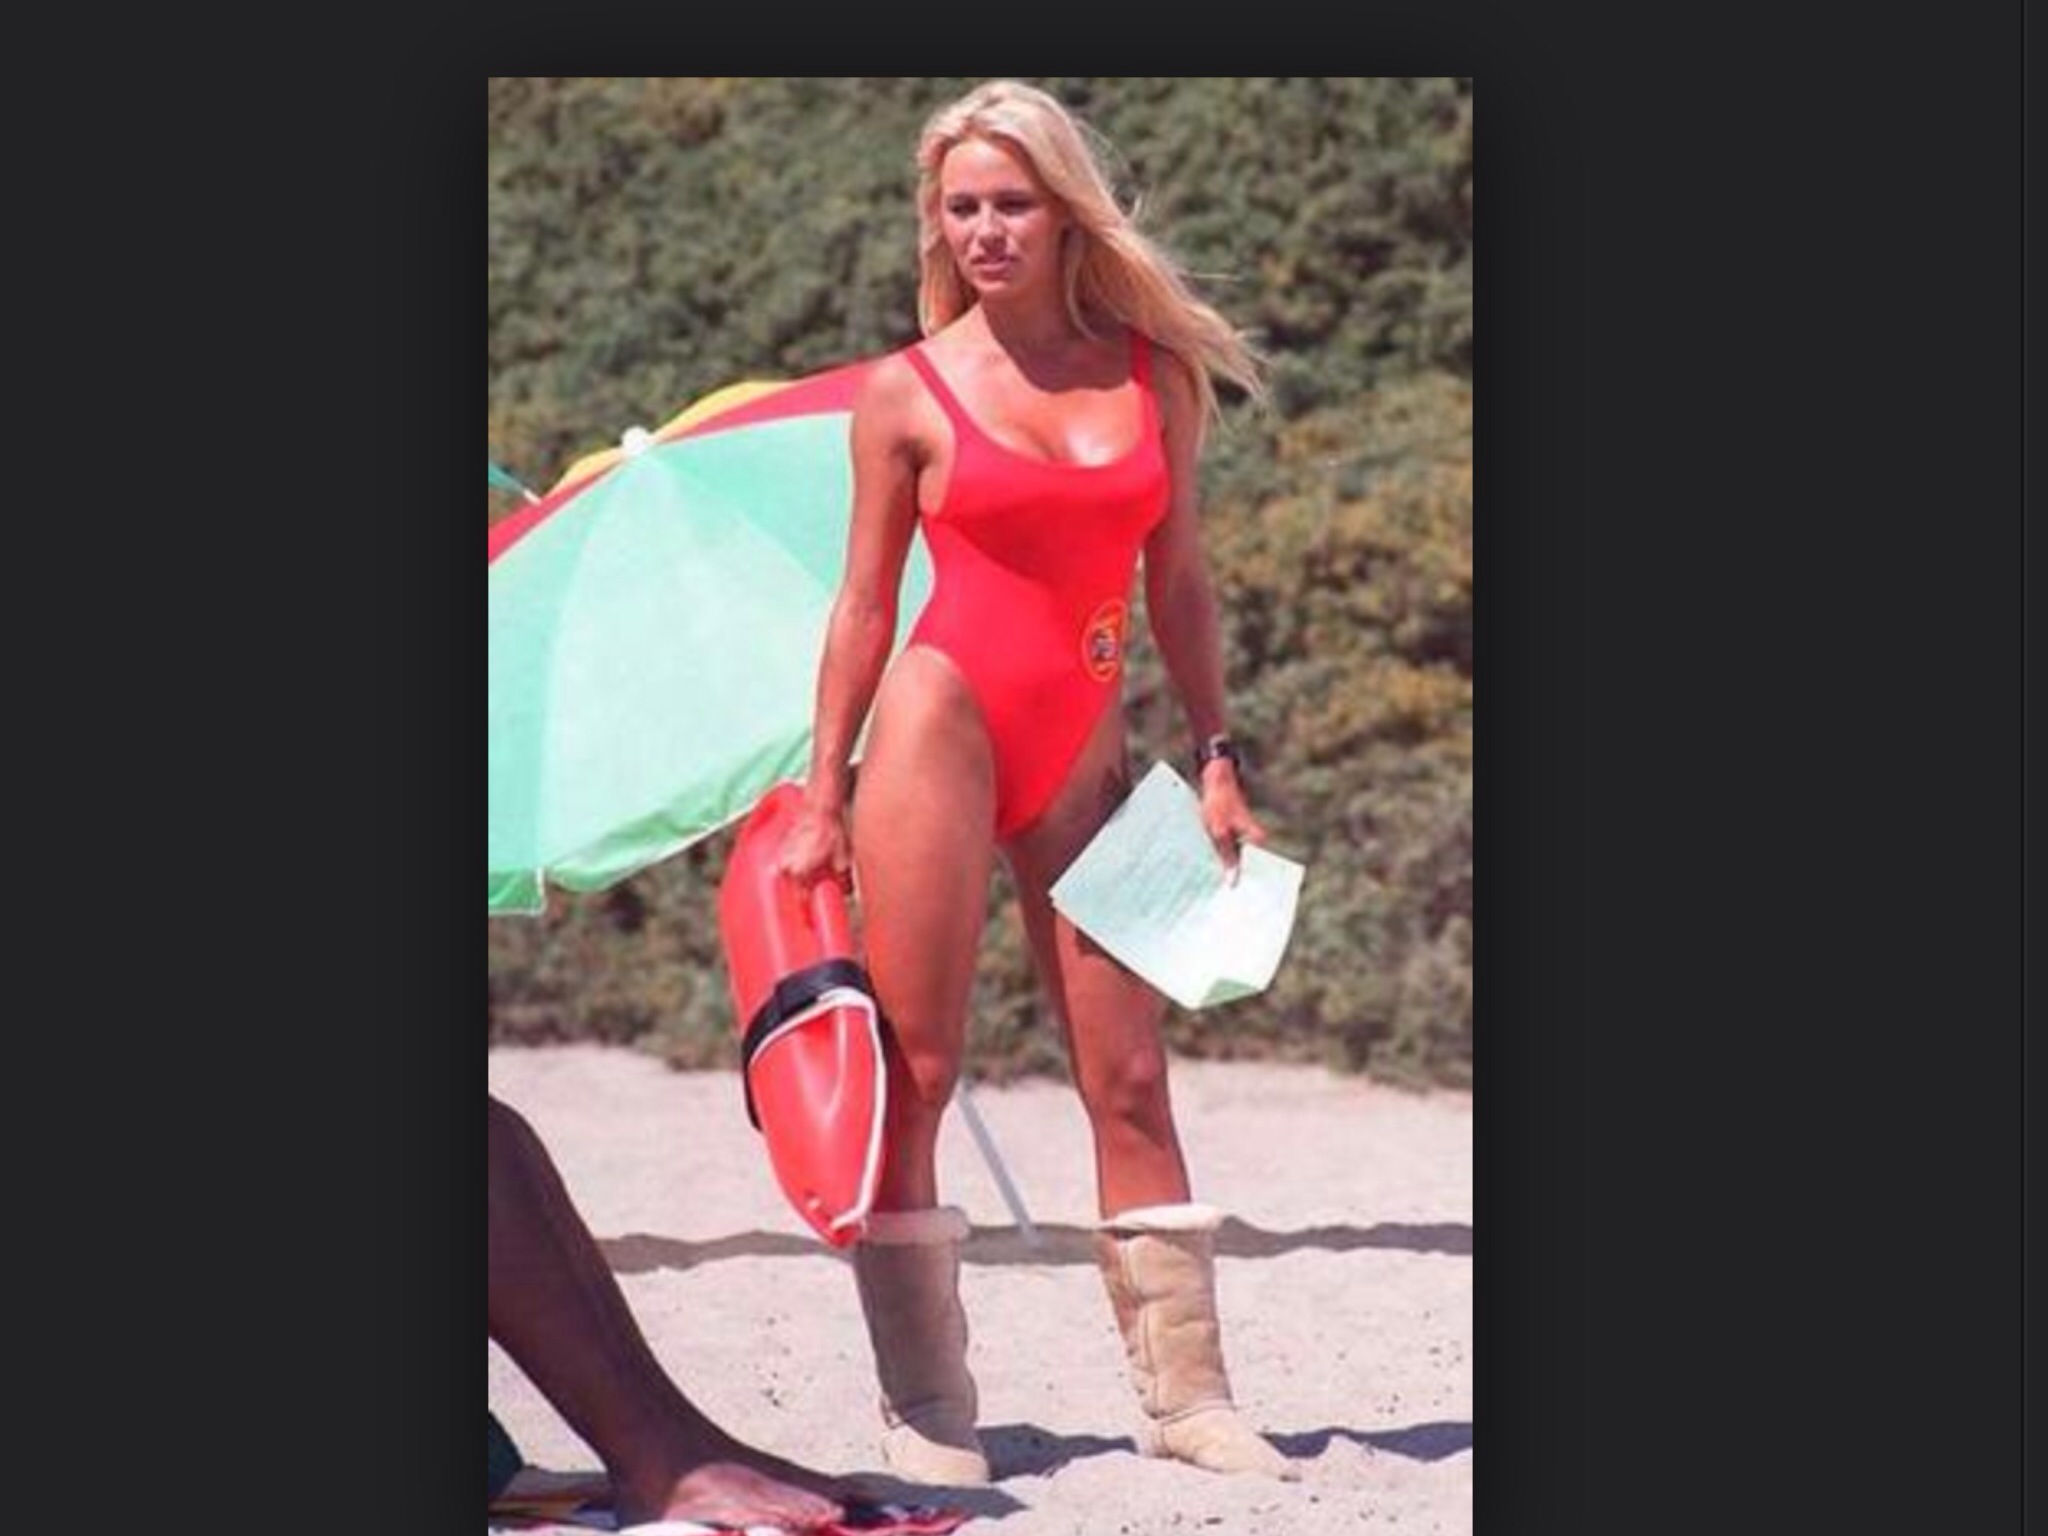 pam anderson uggs